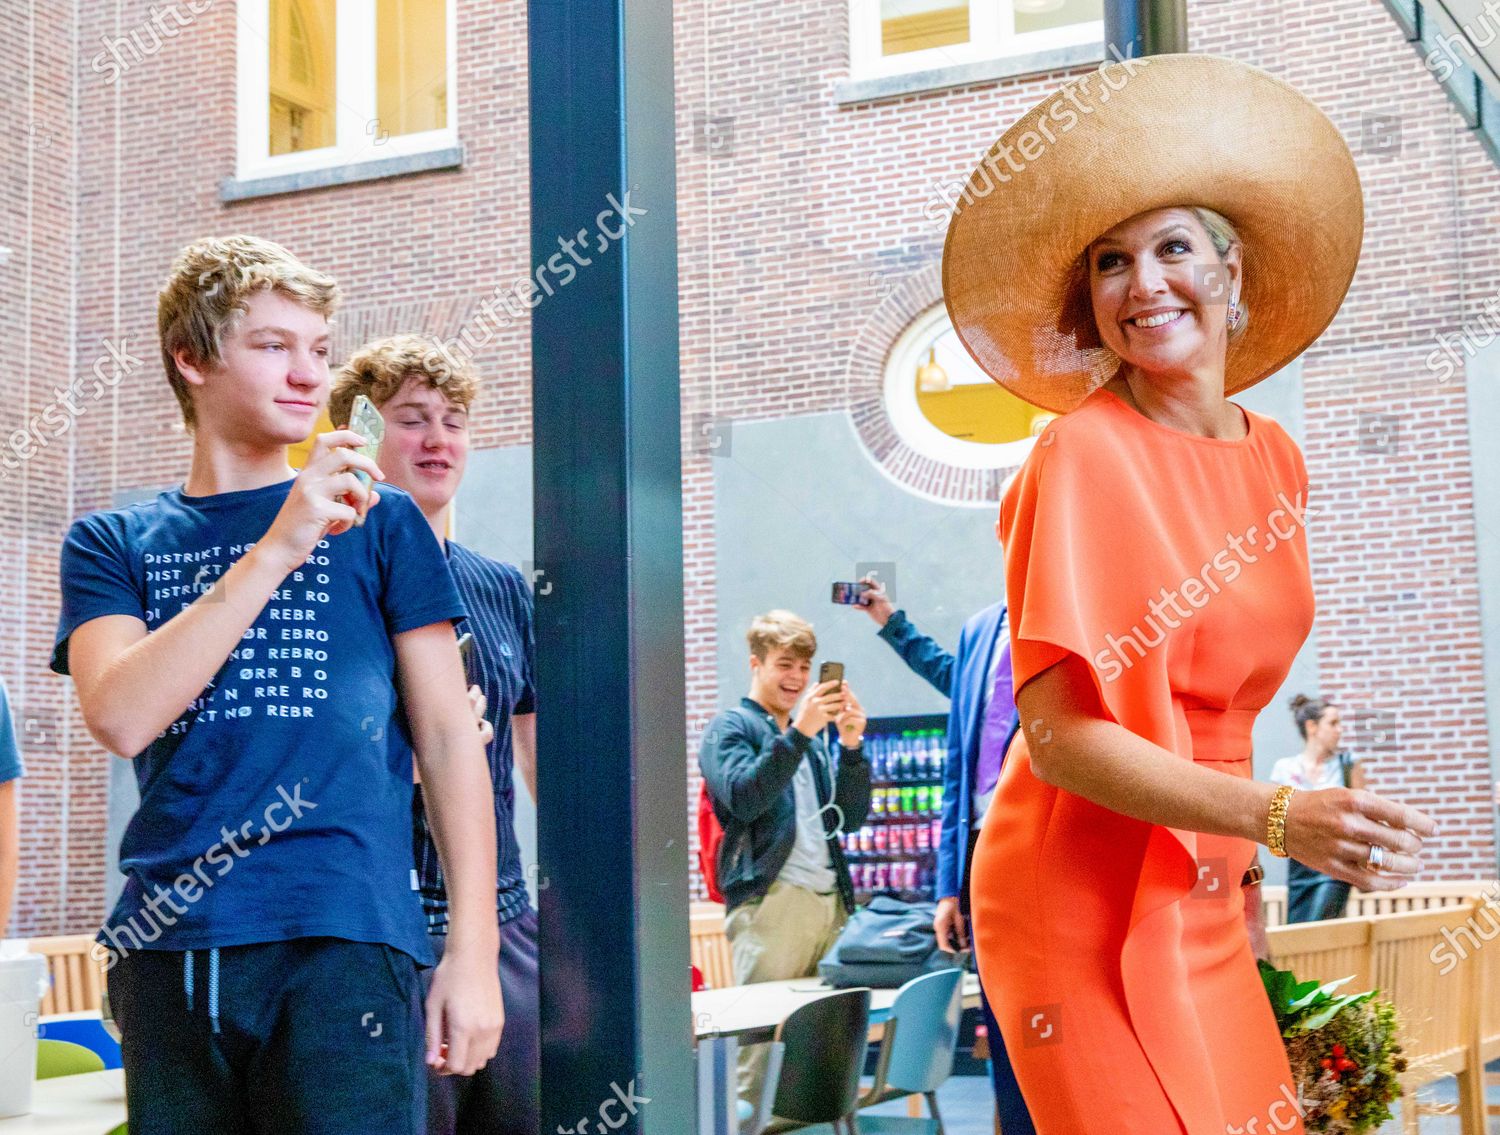 king-willem-alexander-and-queen-maxima-visit-to-south-east-friesland-the-netherlands-shutterstock-editorial-10779996bc.jpg